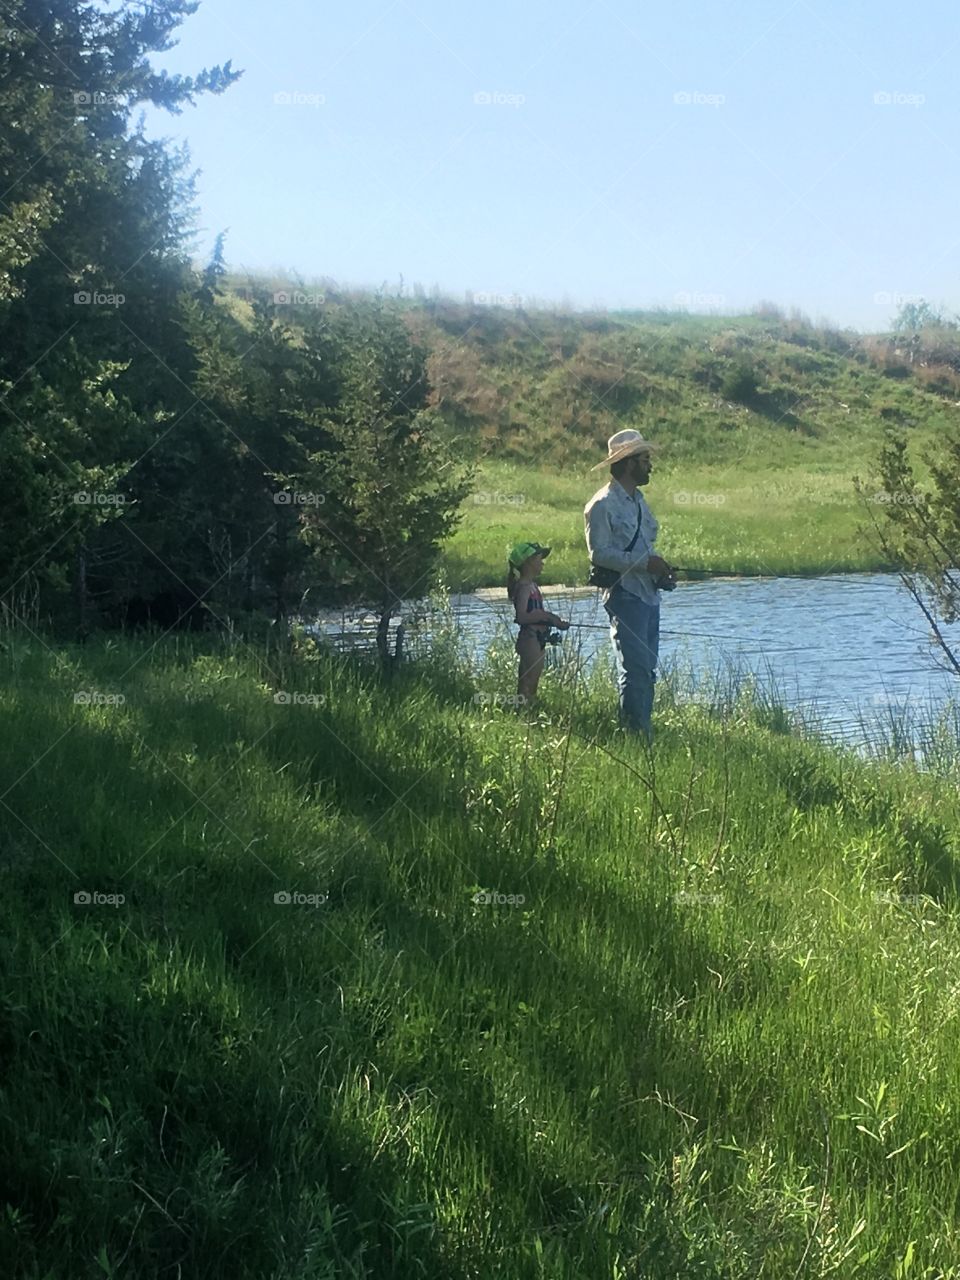 Father and daughter spending quality time together outside at their favorite fishing pond.